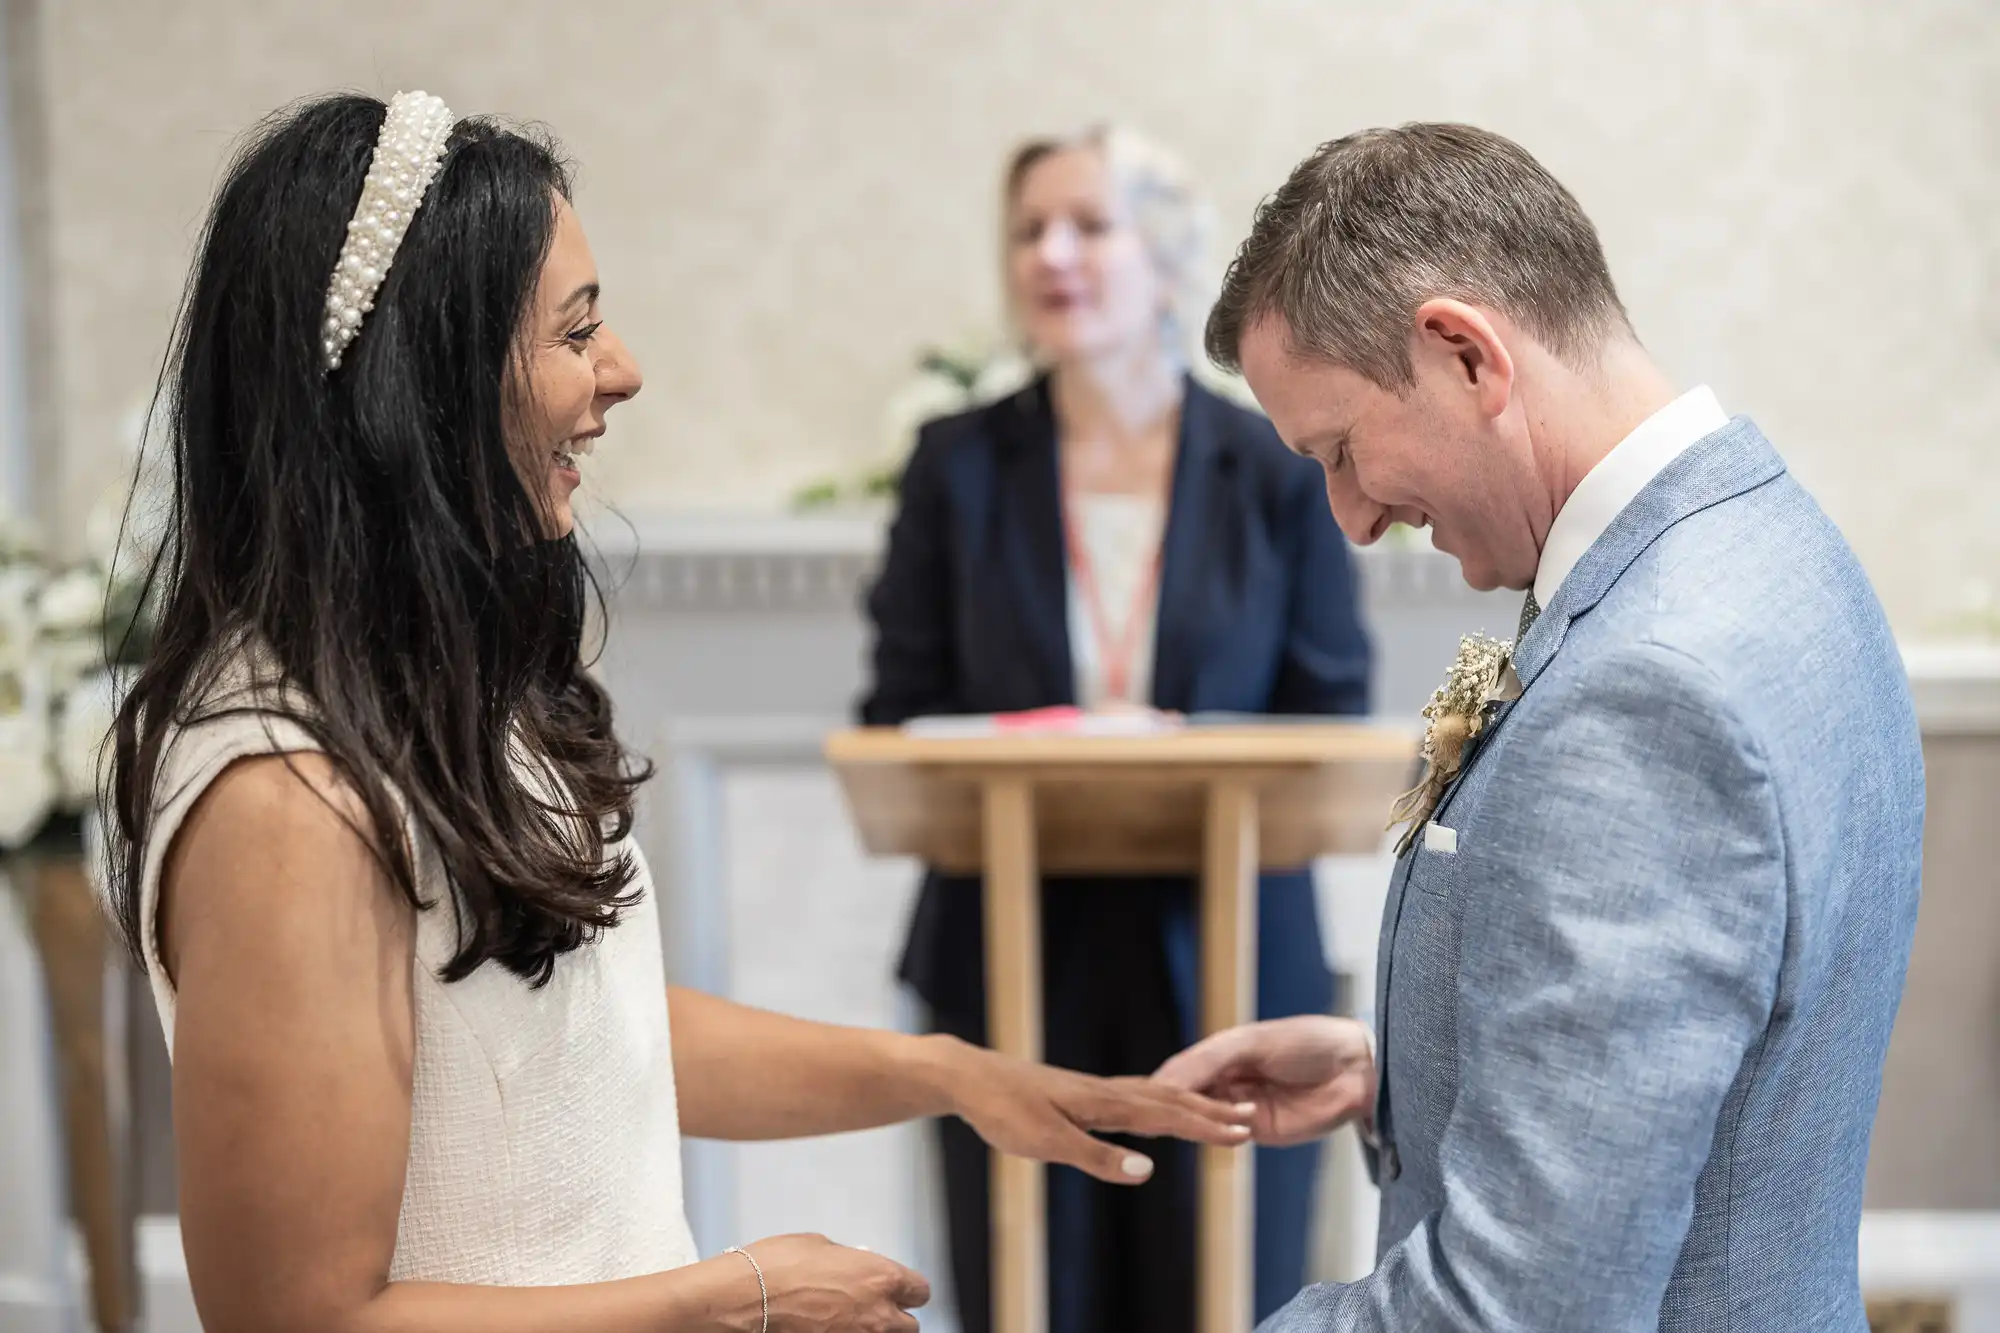 A couple is exchanging rings during a wedding ceremony. An officiant is standing in the background, overseeing the event.